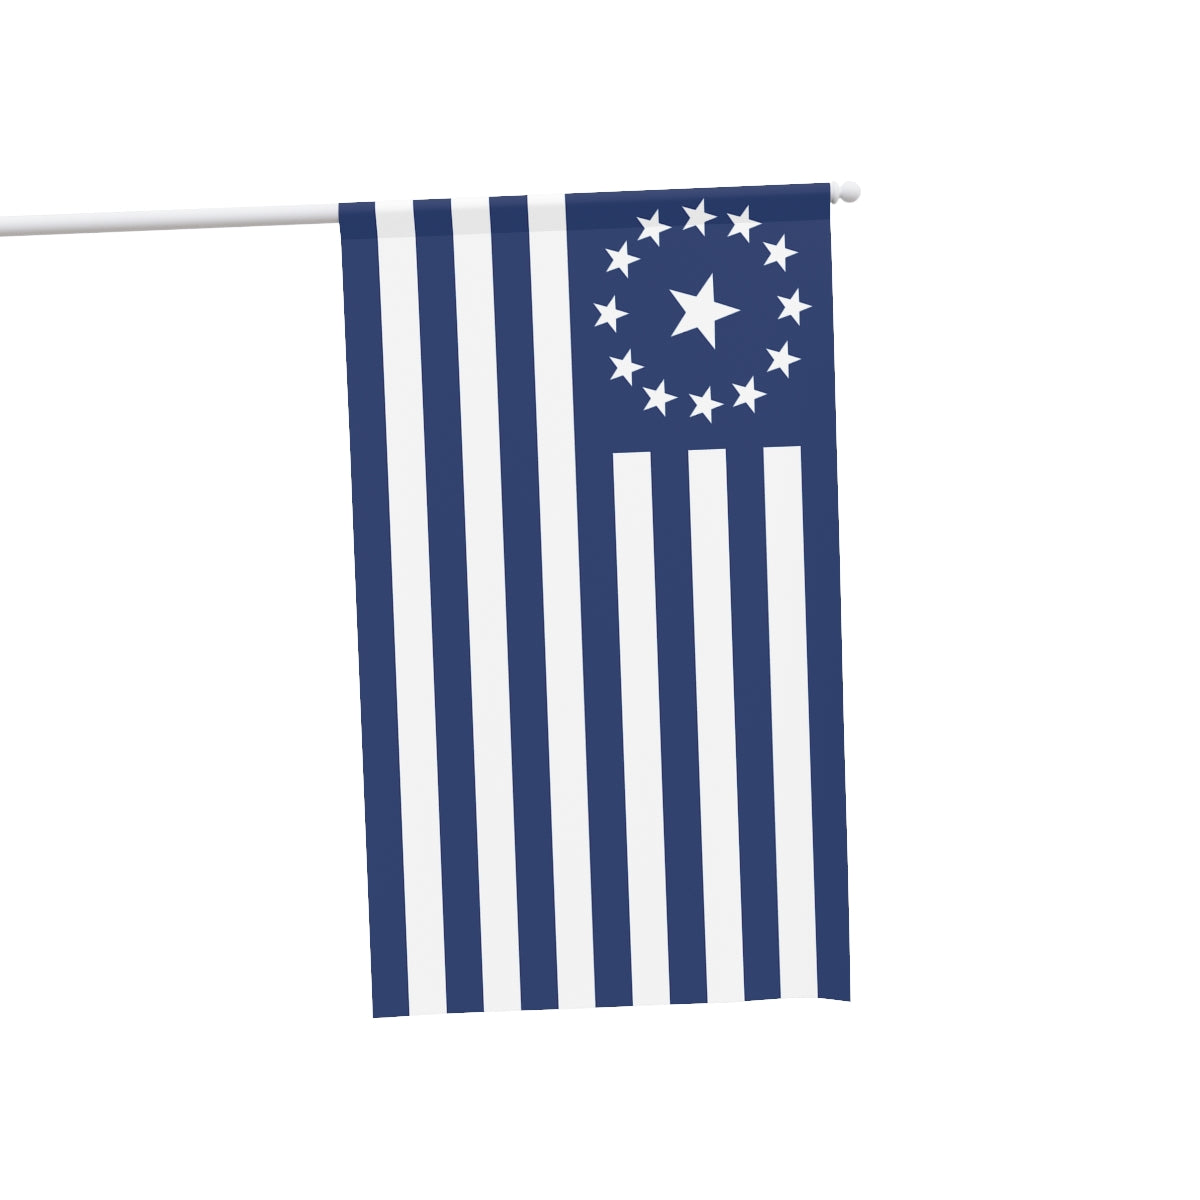 Deseret State Territory Flag - Replica Flag of Deseret Kimball Maguire Flag